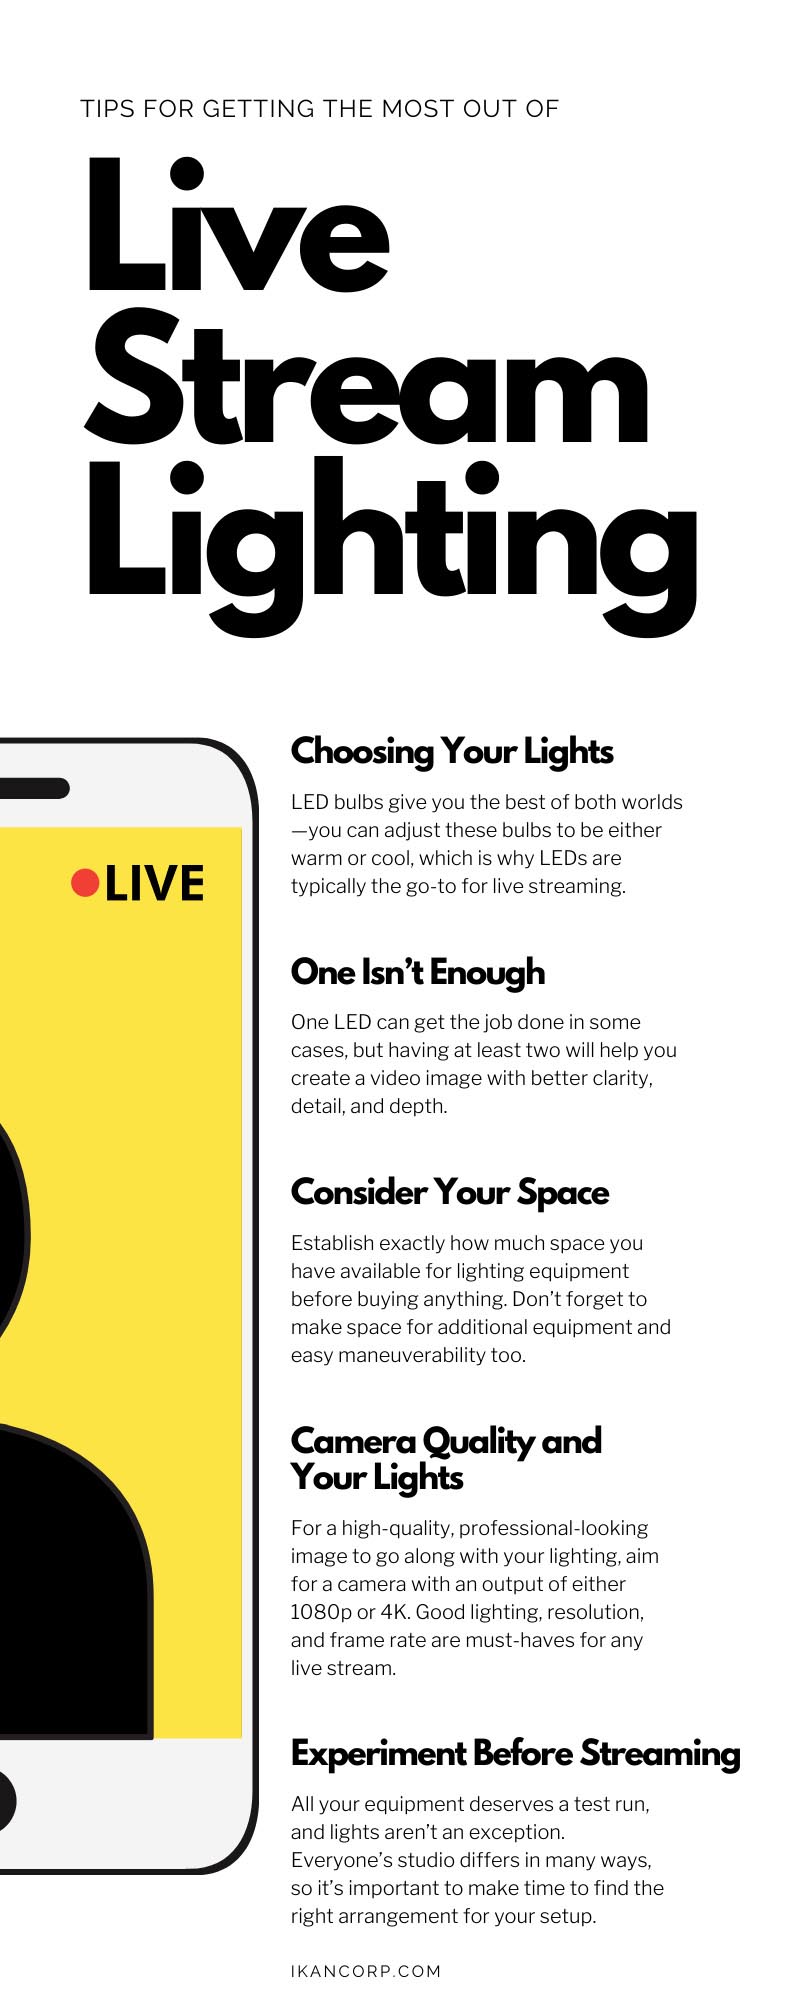 Tips for Getting the Most Out of Live Stream Lighting